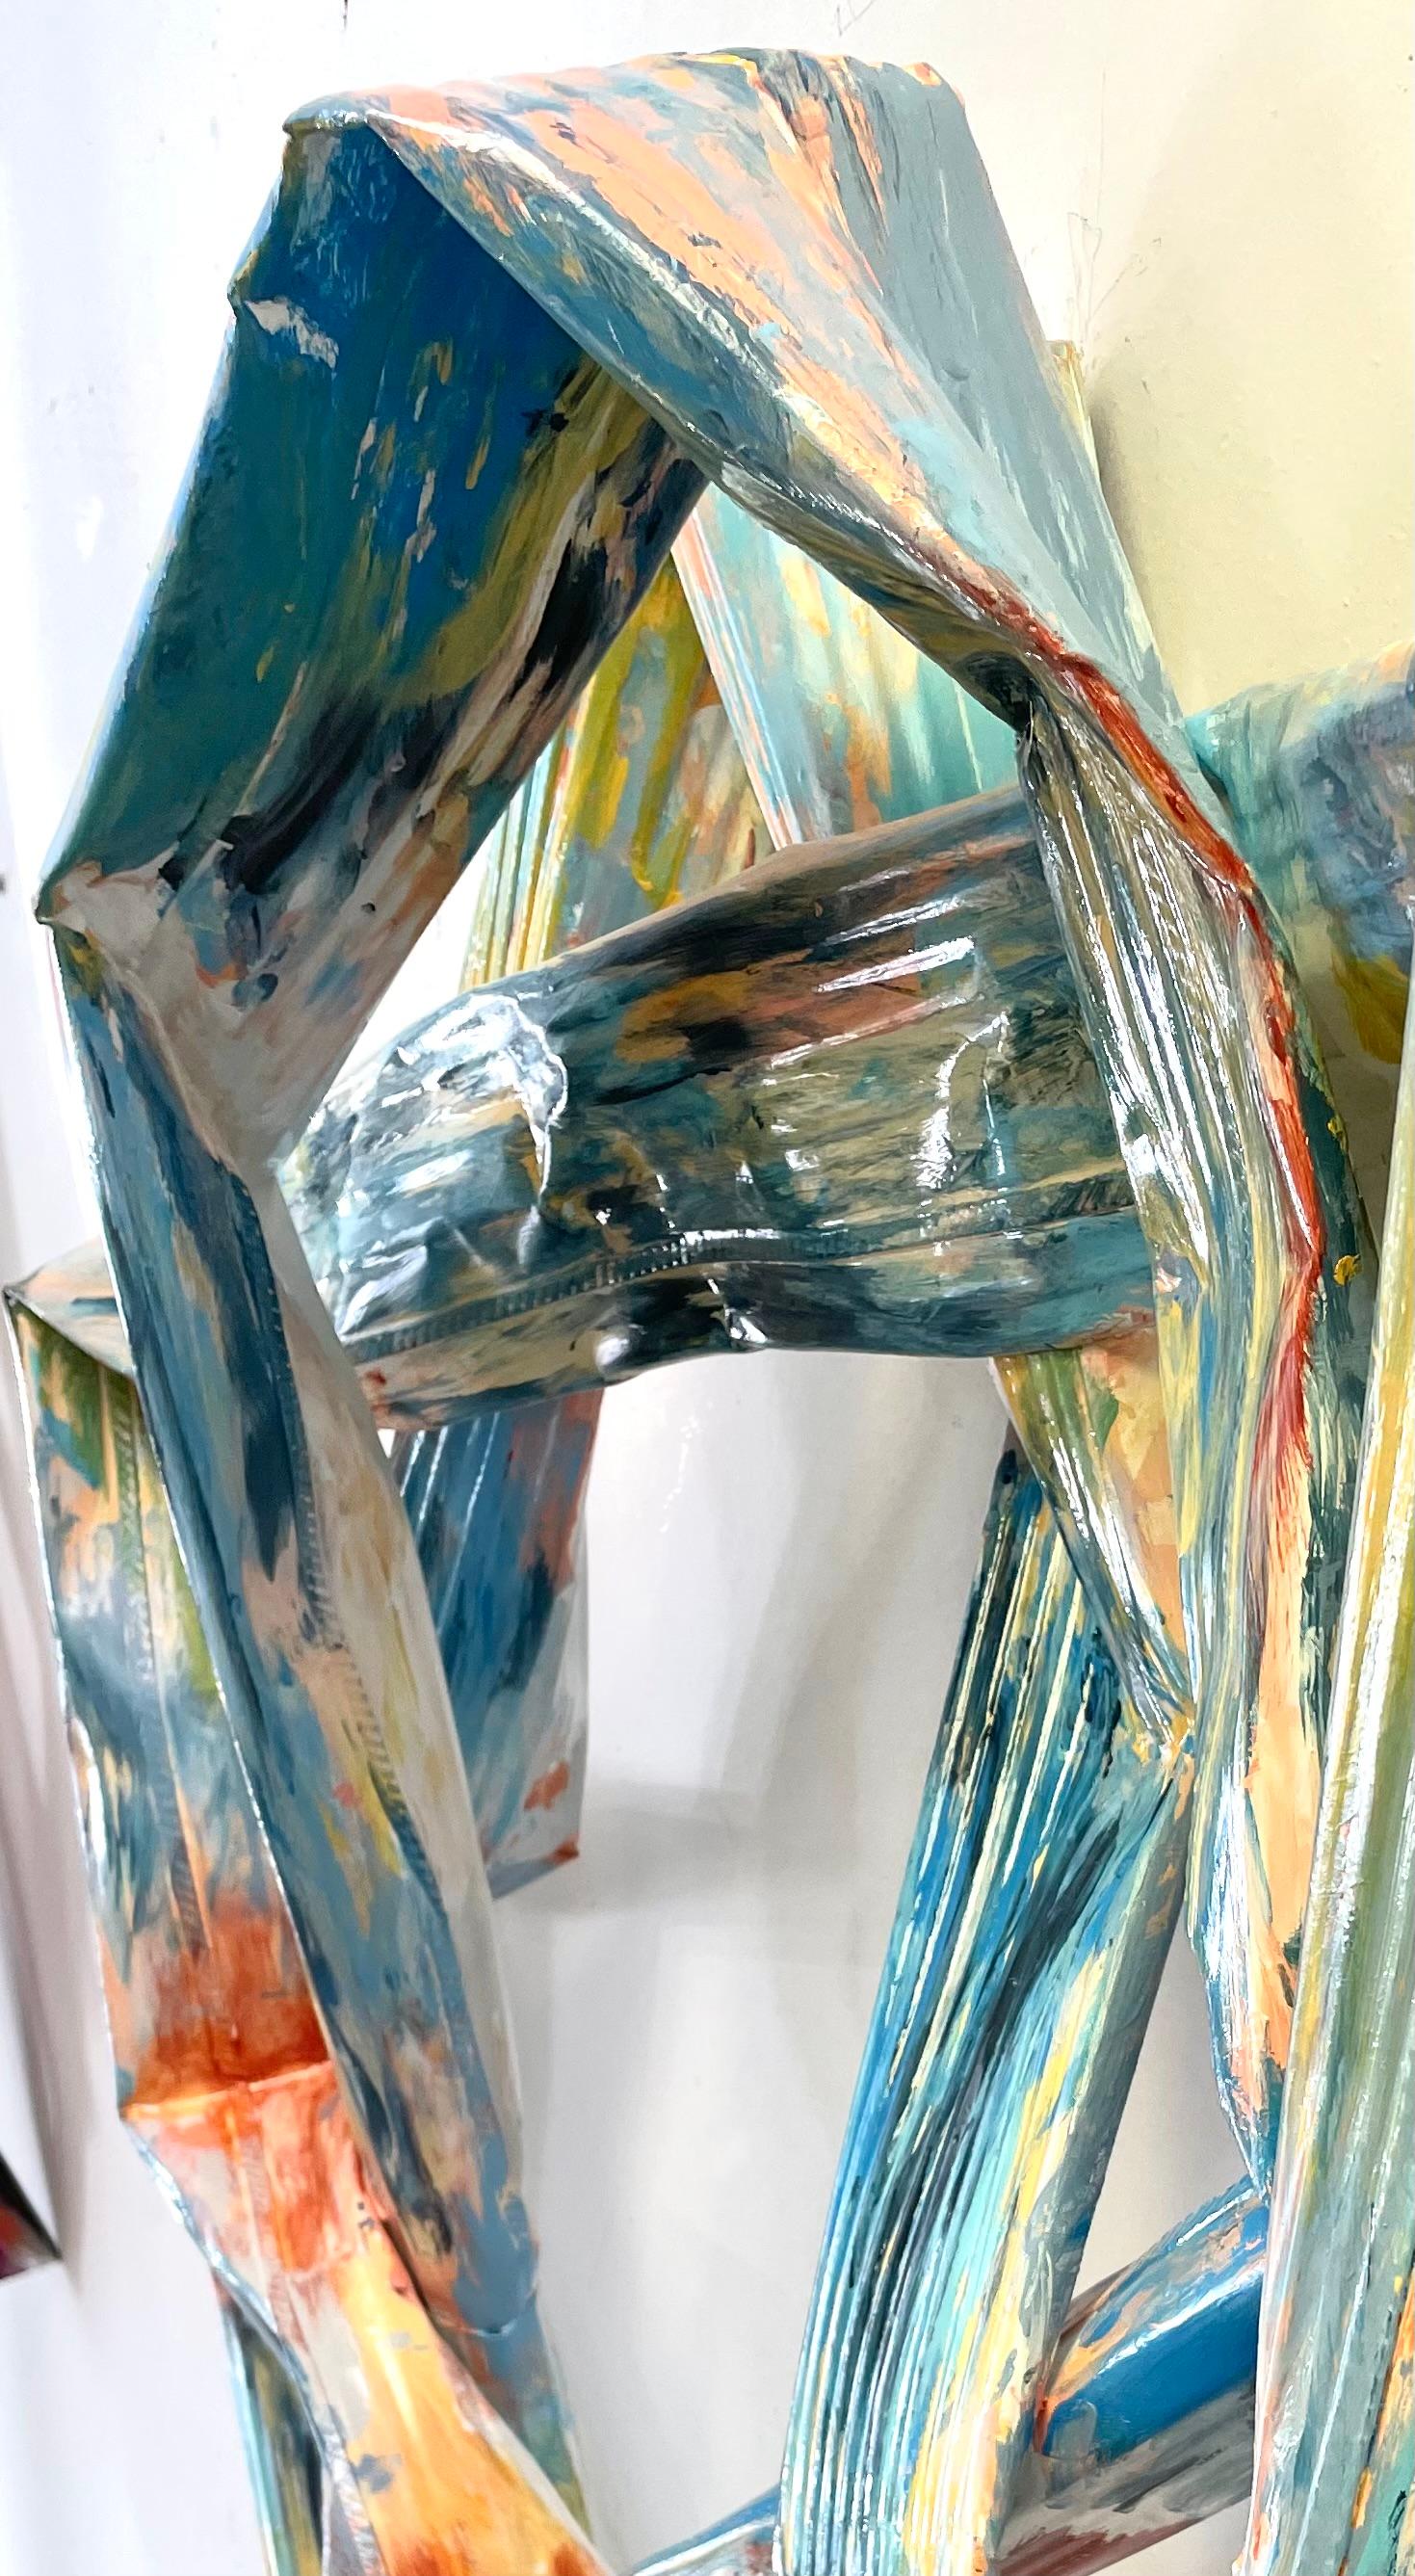 Joy Filled - Abstract Sculpture by Thomas Hoitsma